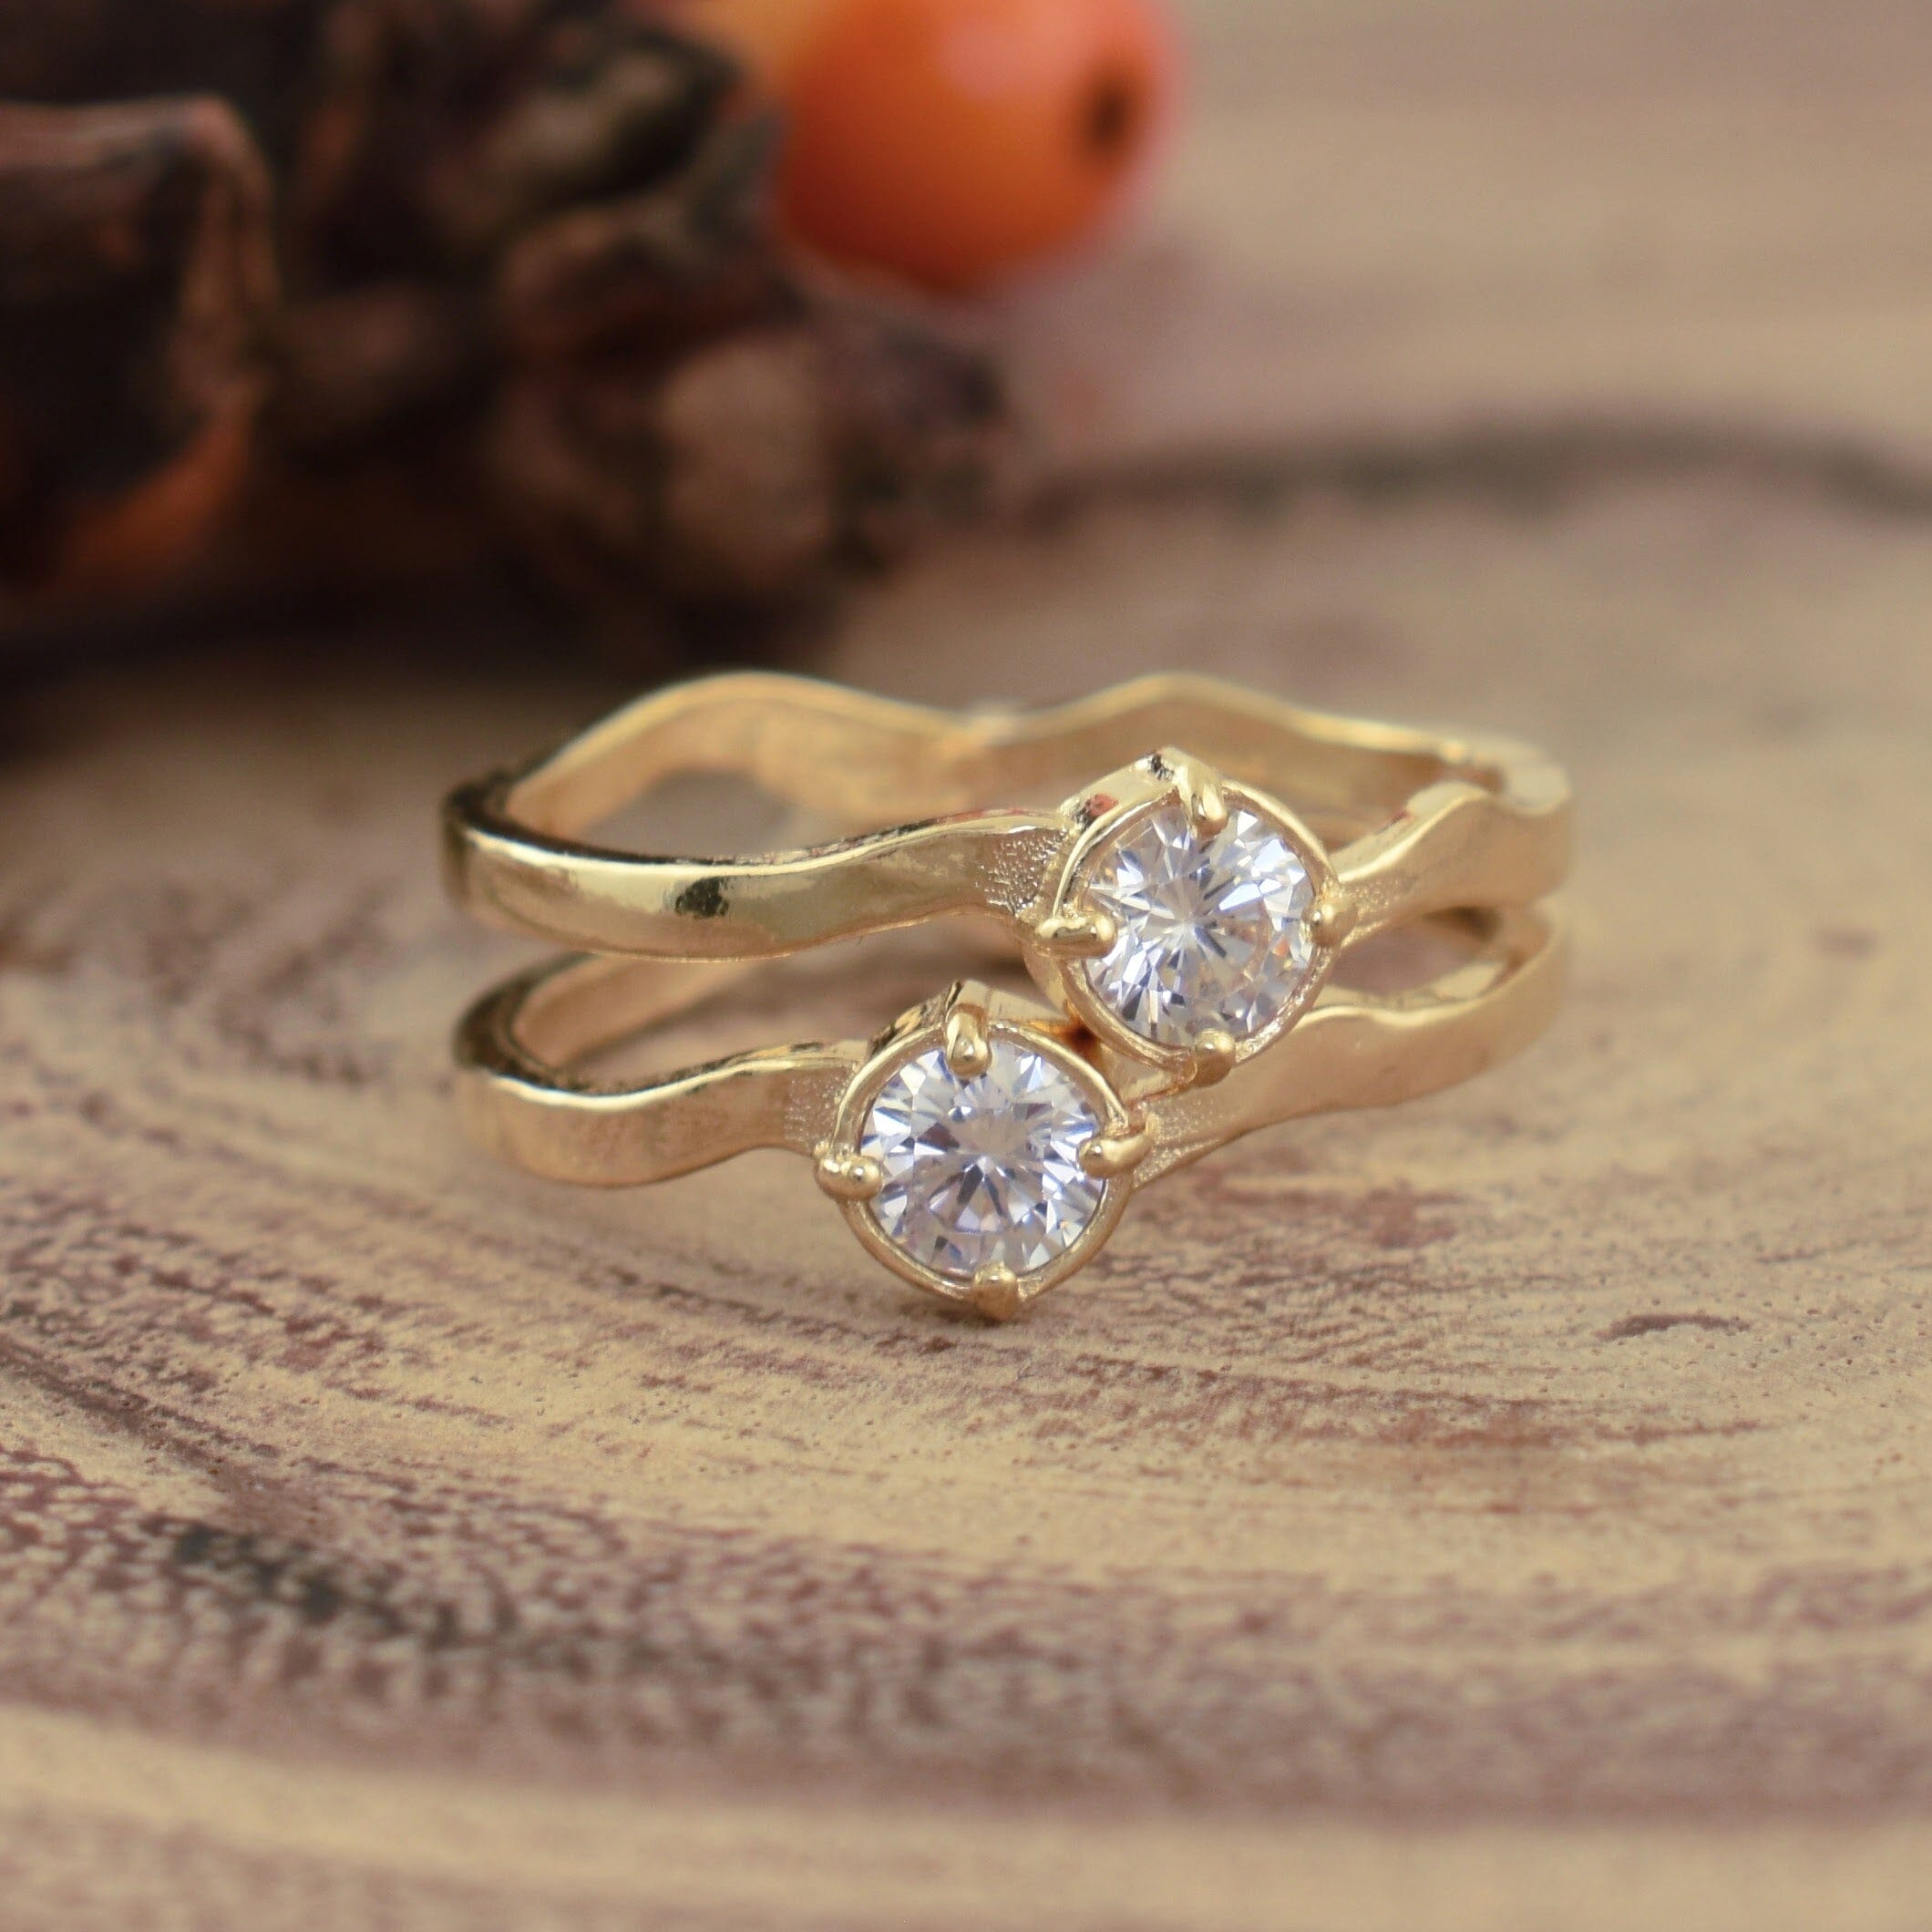 Gold stack ring with round cz stone